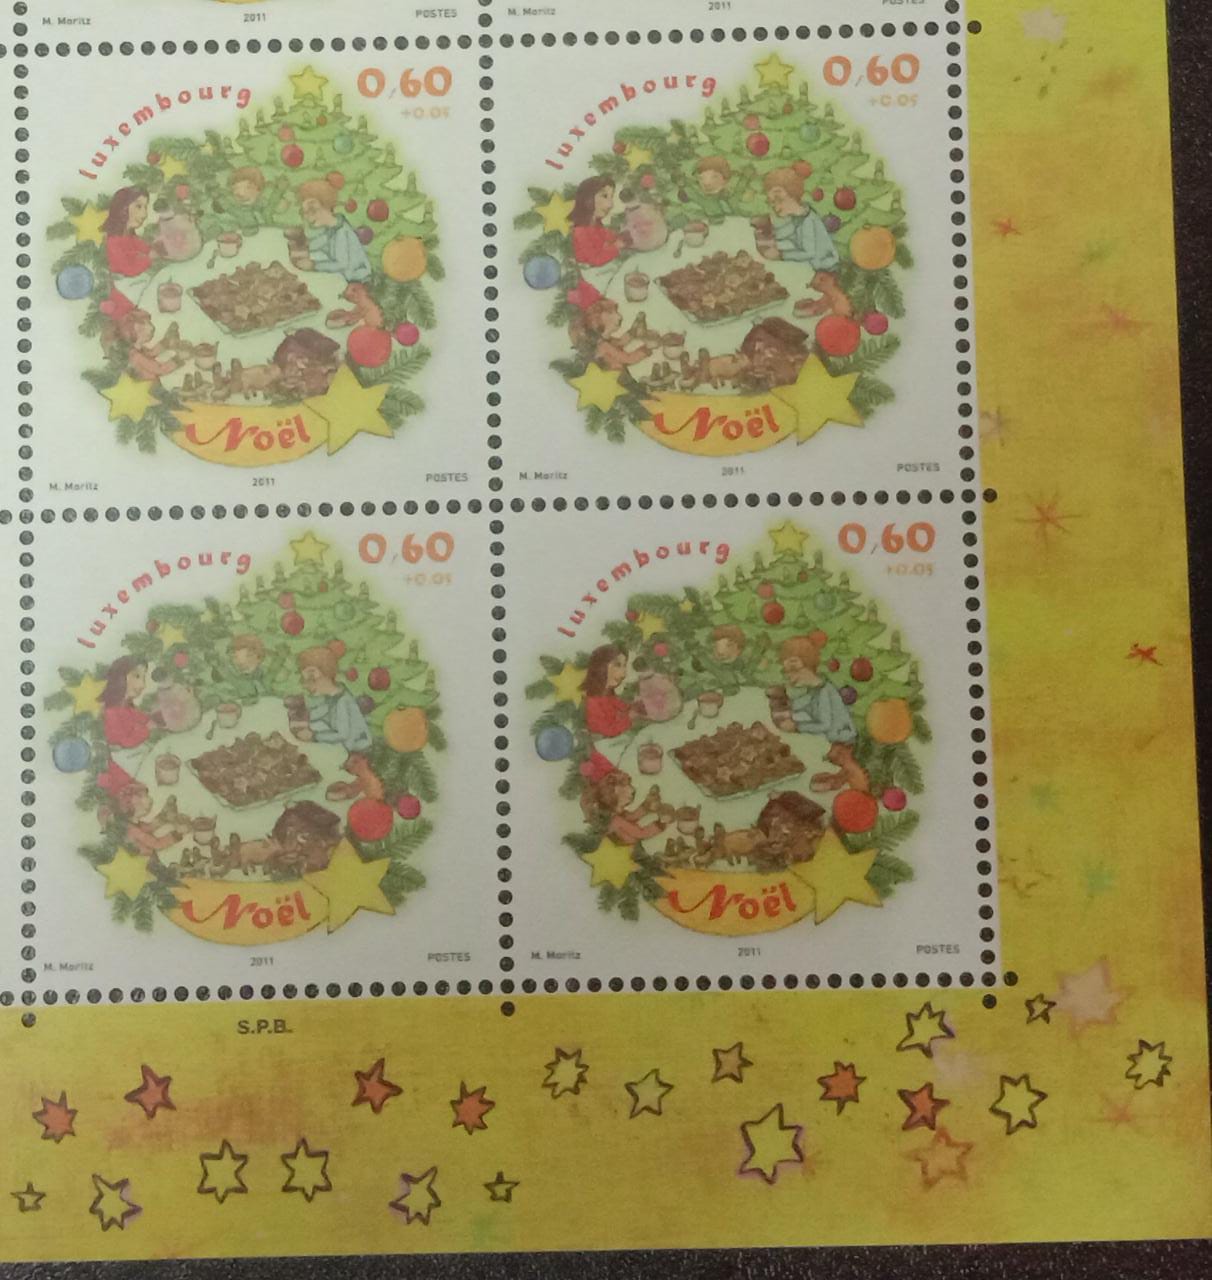 Luxembourg 2011  Stamp with fragrance of Xmas cake.